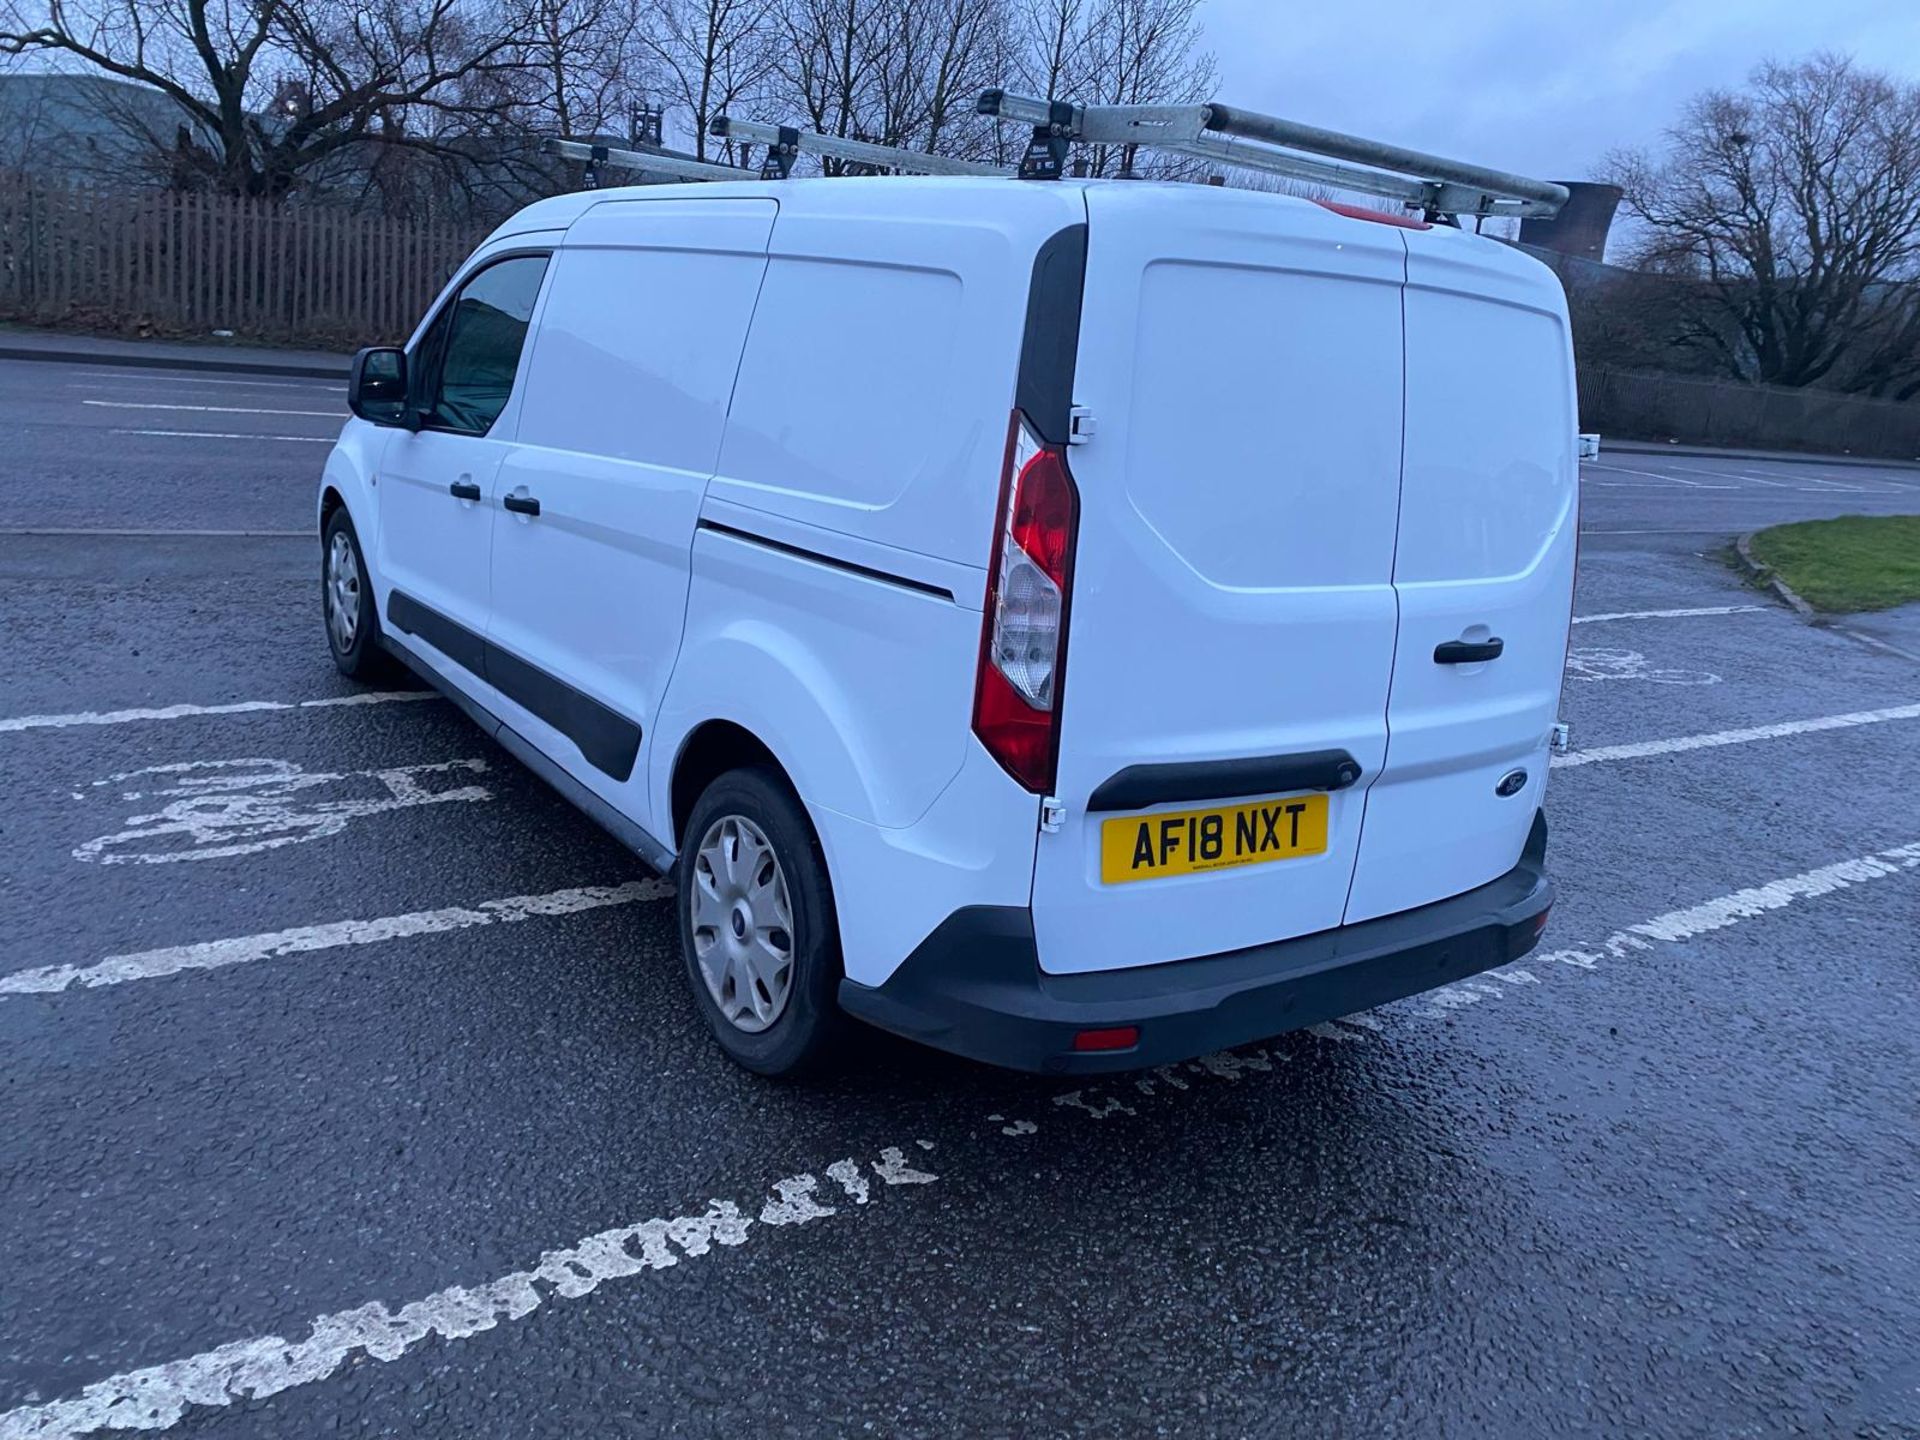 2018 18 FORD TRANSIT CONNECT TREND PAENL VAN - 128K MILES - EURO 6 - 3 SEATS - LWB - ROOF RACK. - Image 9 of 13